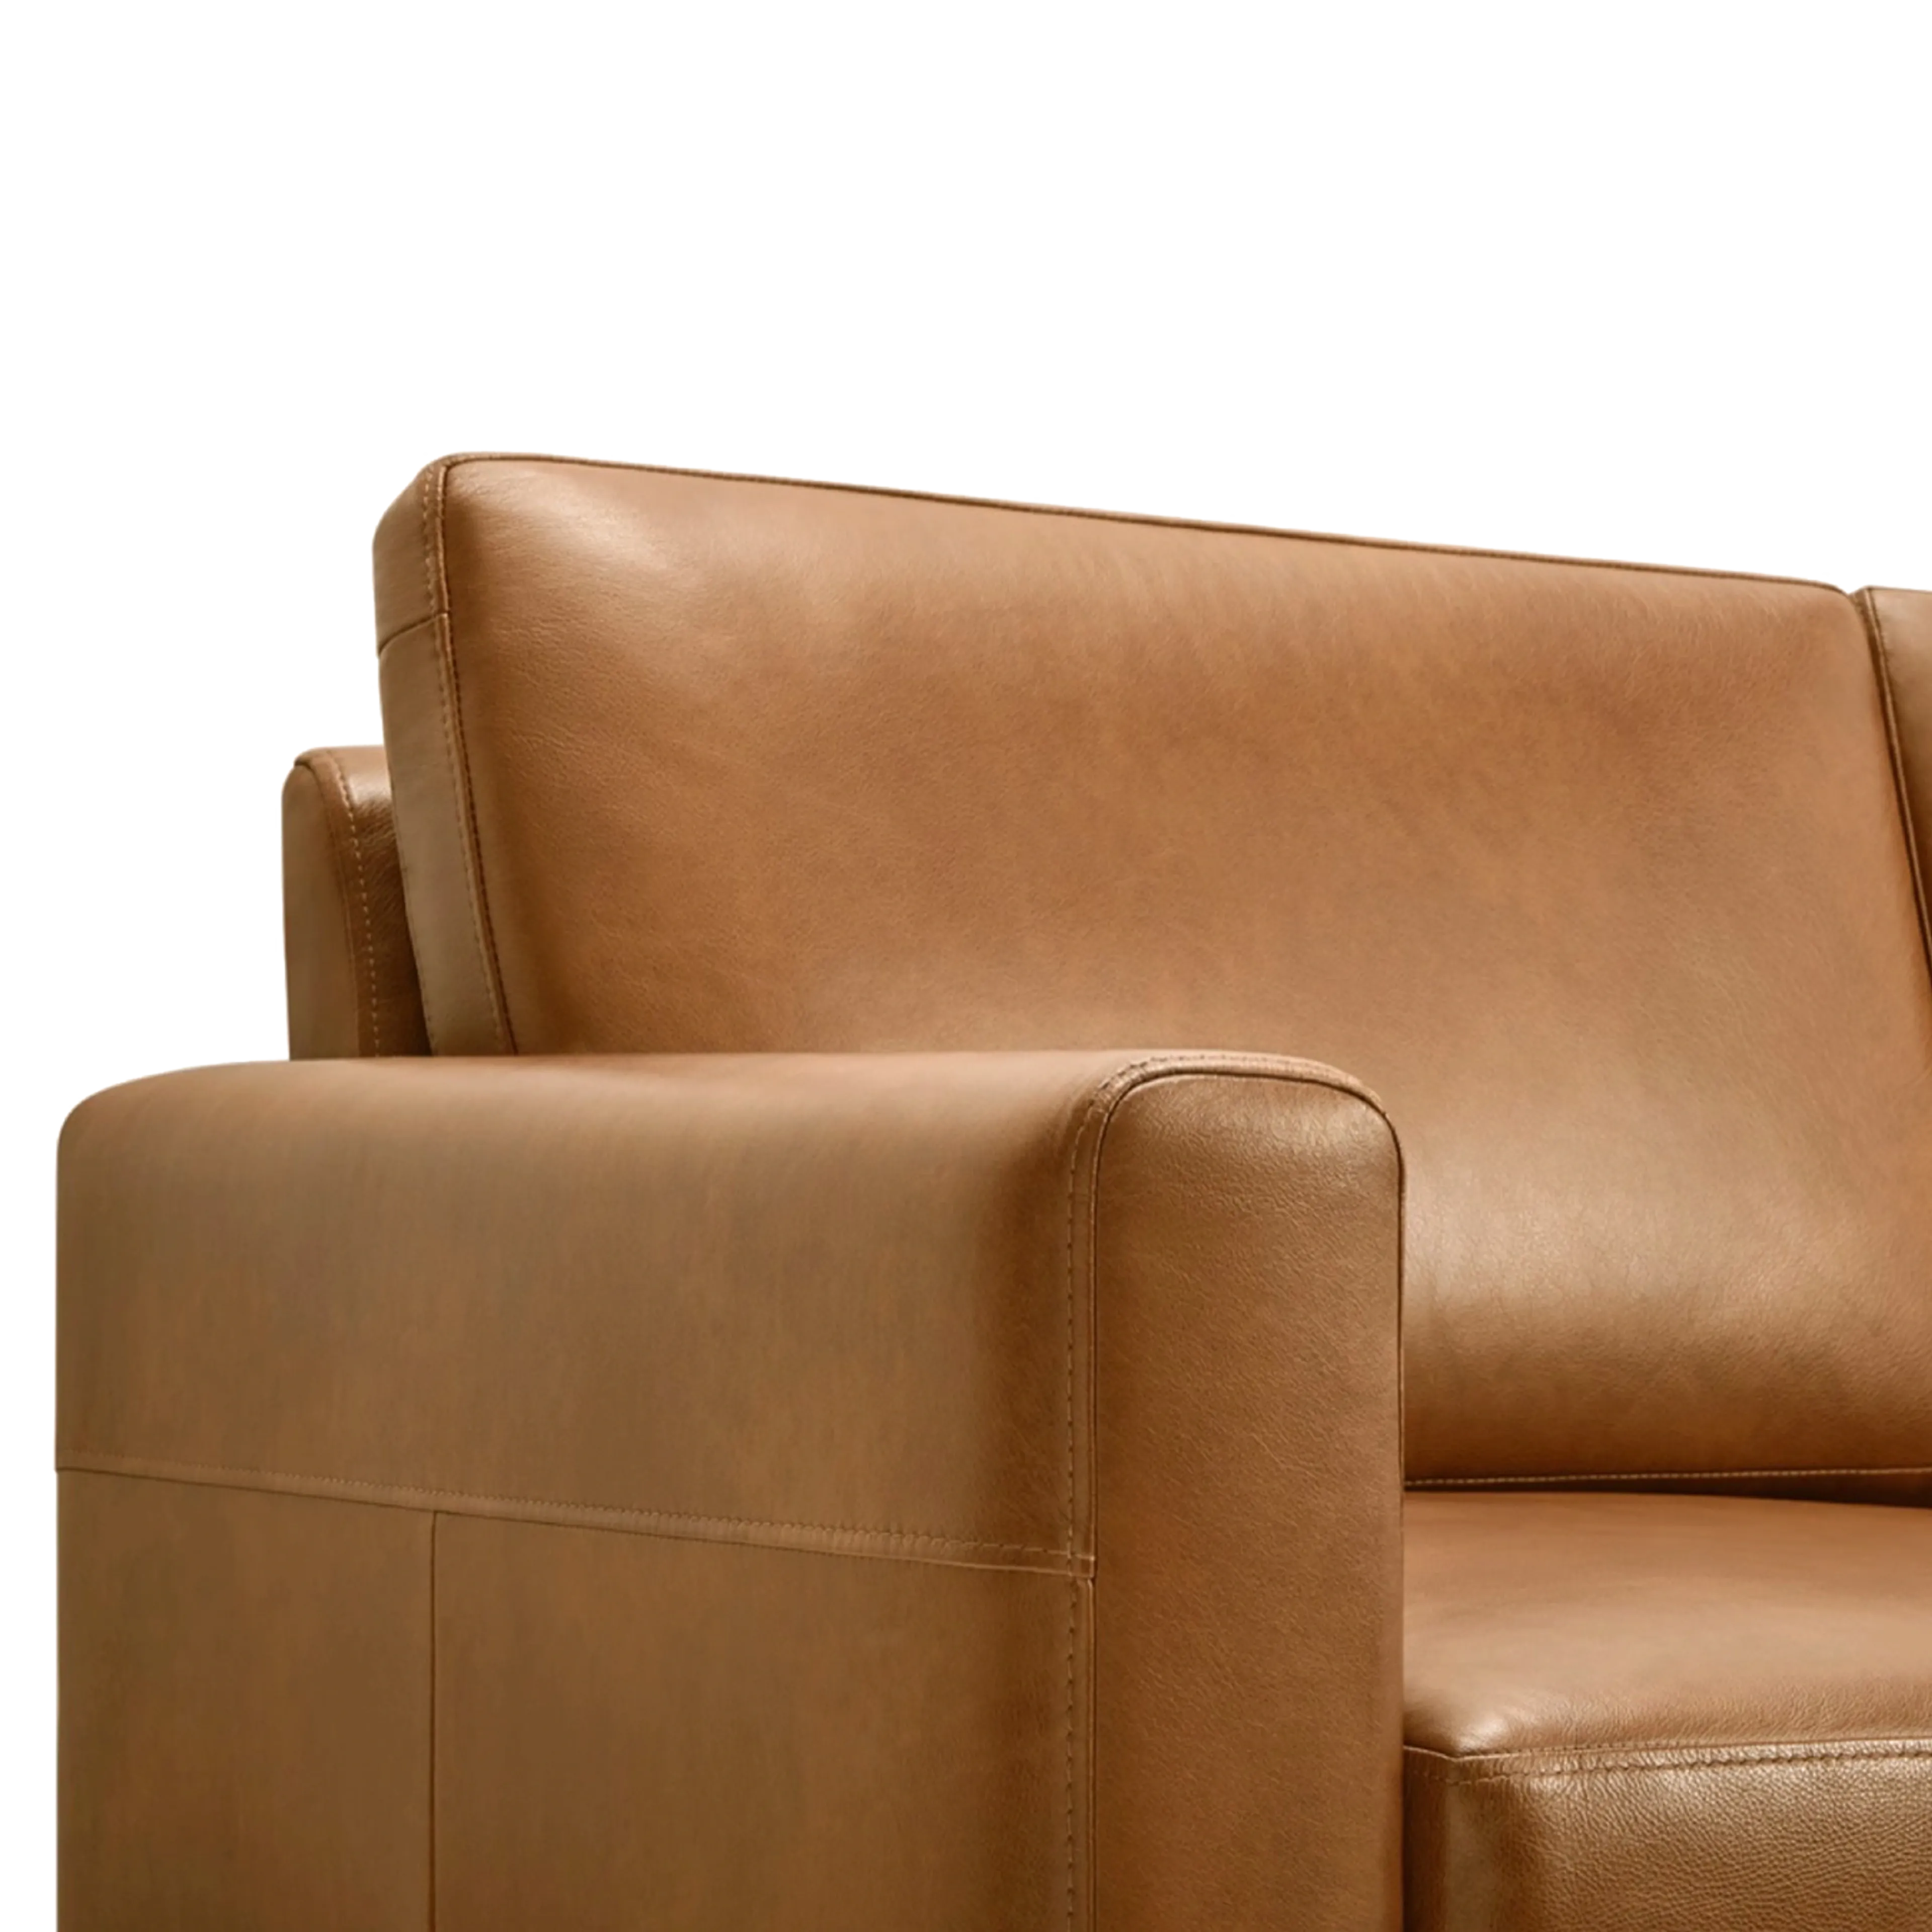 Nomad leather sofa in Camel